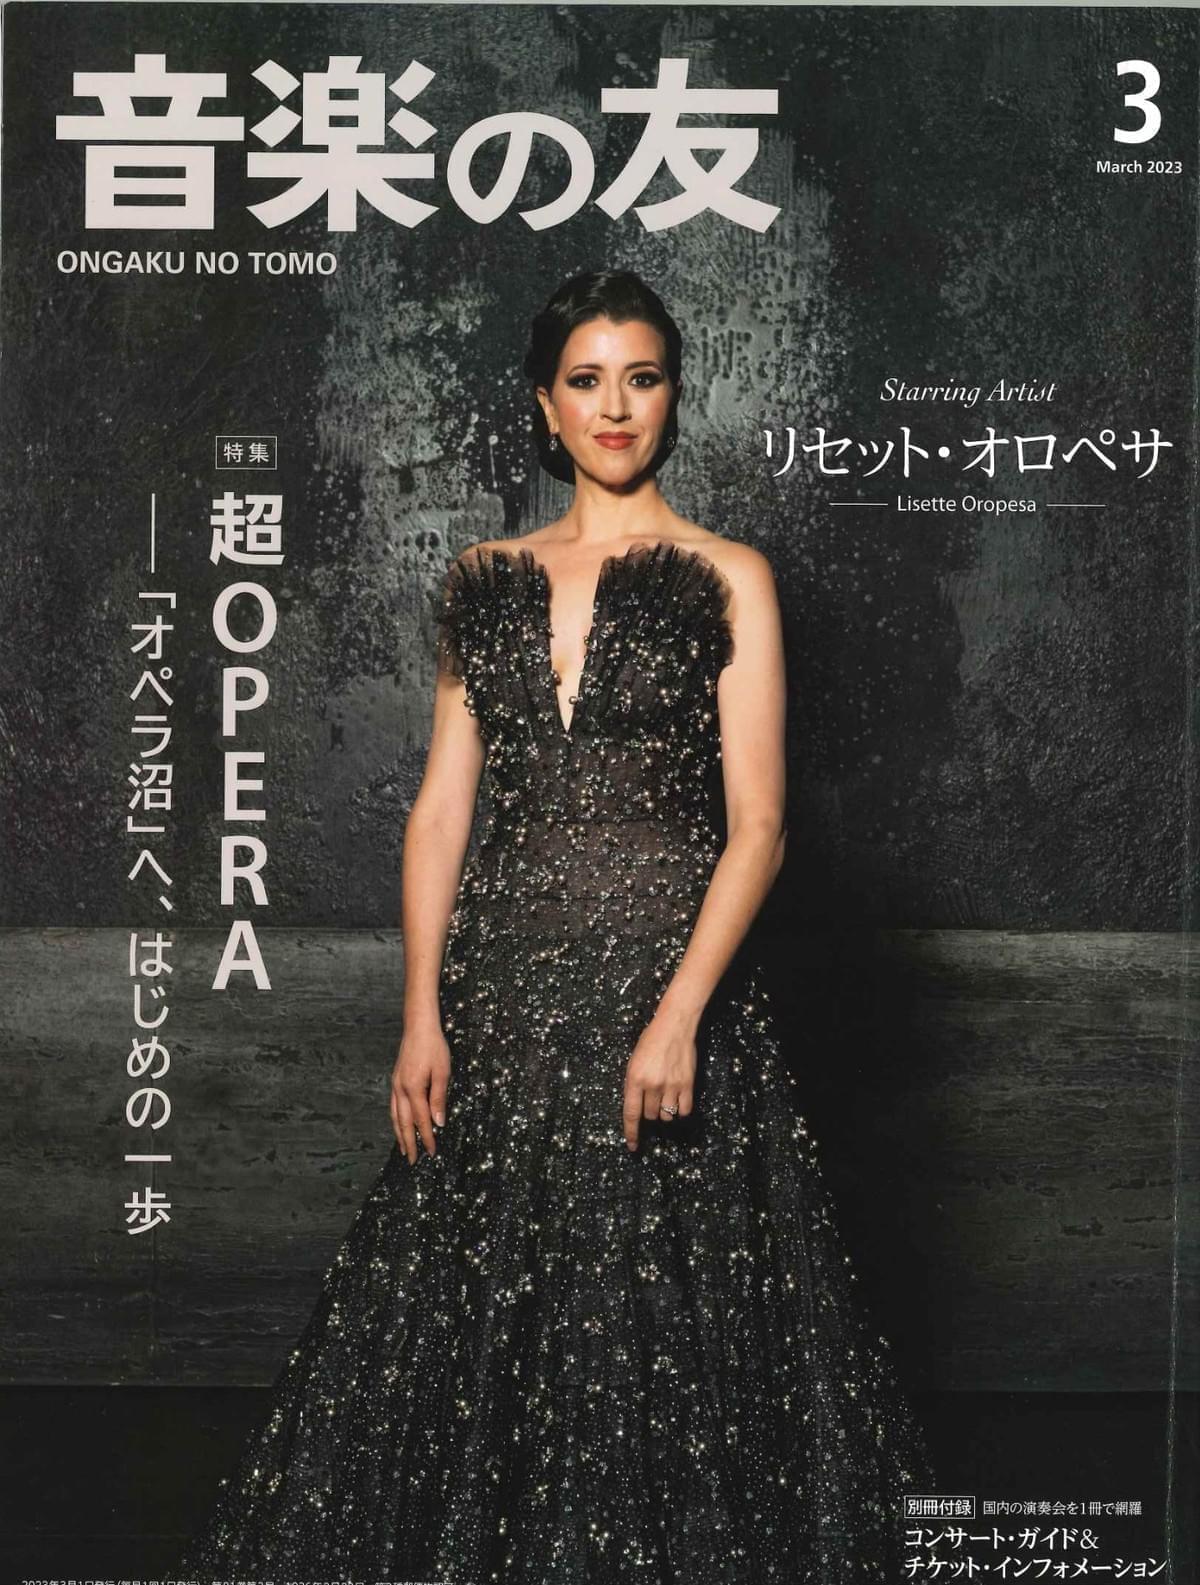 Lisette is interviewed in Ongaku No Tomo about her upcoming performances of La traviata with the Rome Opera in Tokyo